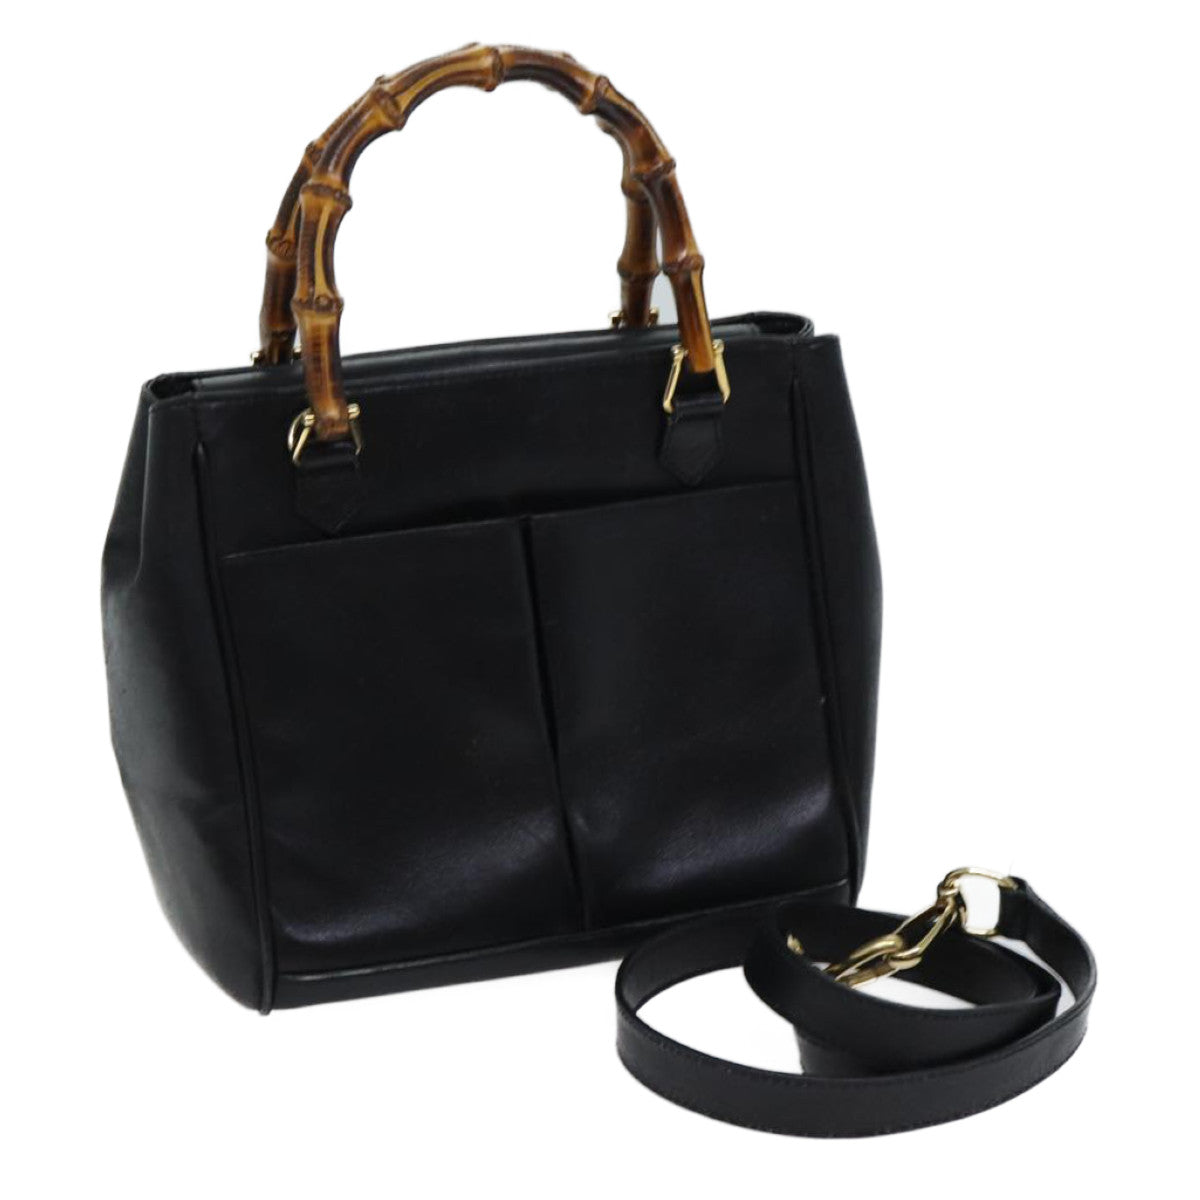 GUCCI Bamboo Hand Bag Leather 2way Black 000 122 0316 Auth 69772